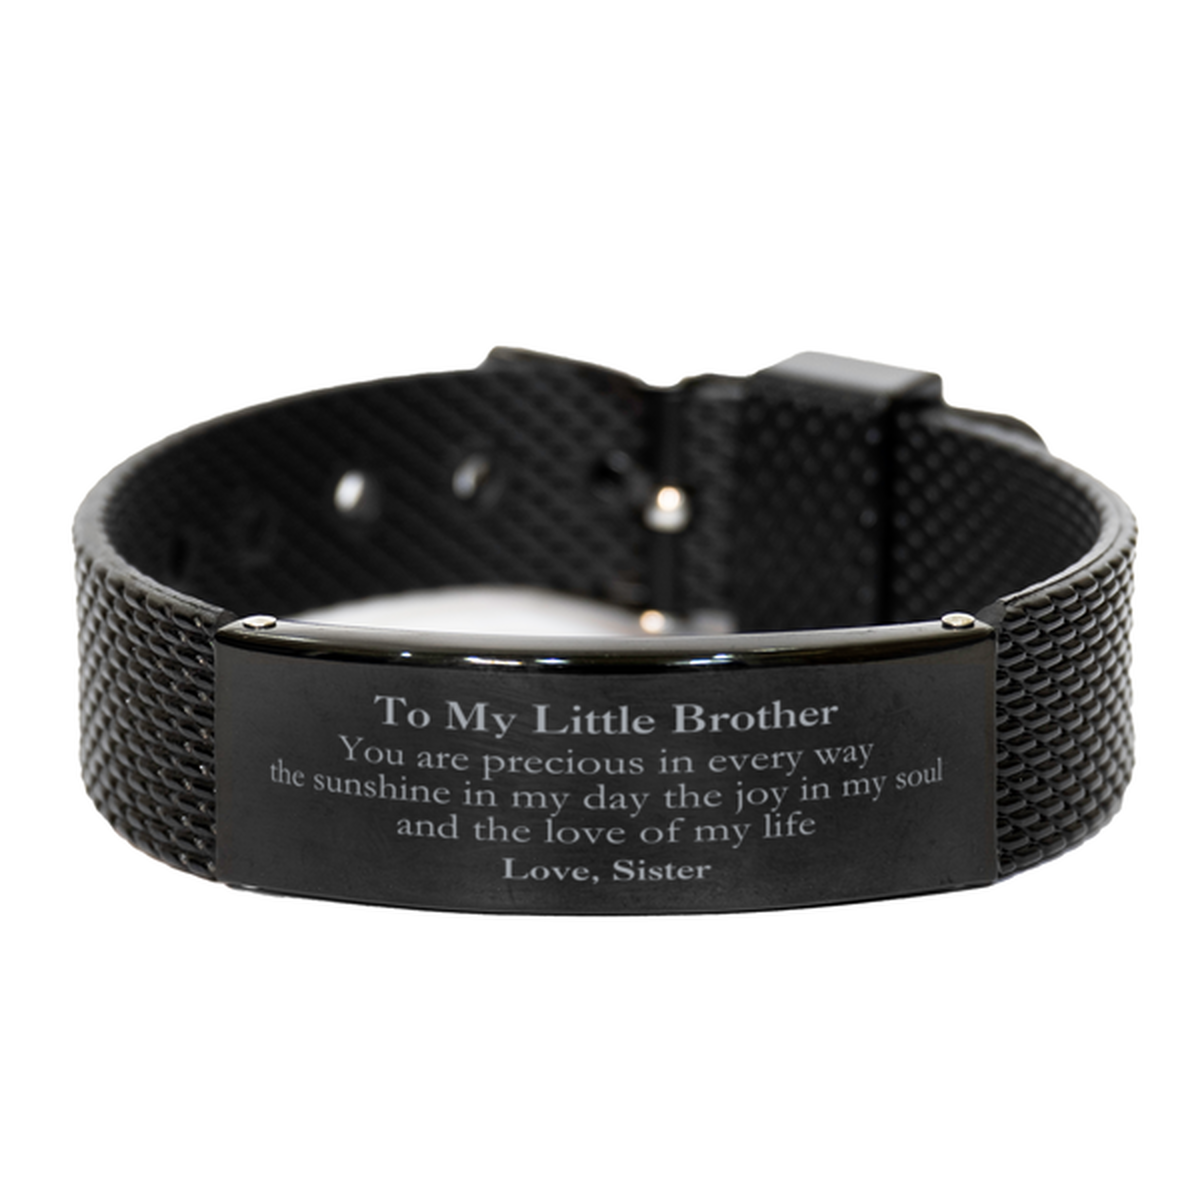 Graduation Gifts for Little Brother Black Shark Mesh Bracelet Present from Sister, Christmas Little Brother Birthday Gifts Little Brother You are precious in every way the sunshine in my day. Love, Sister